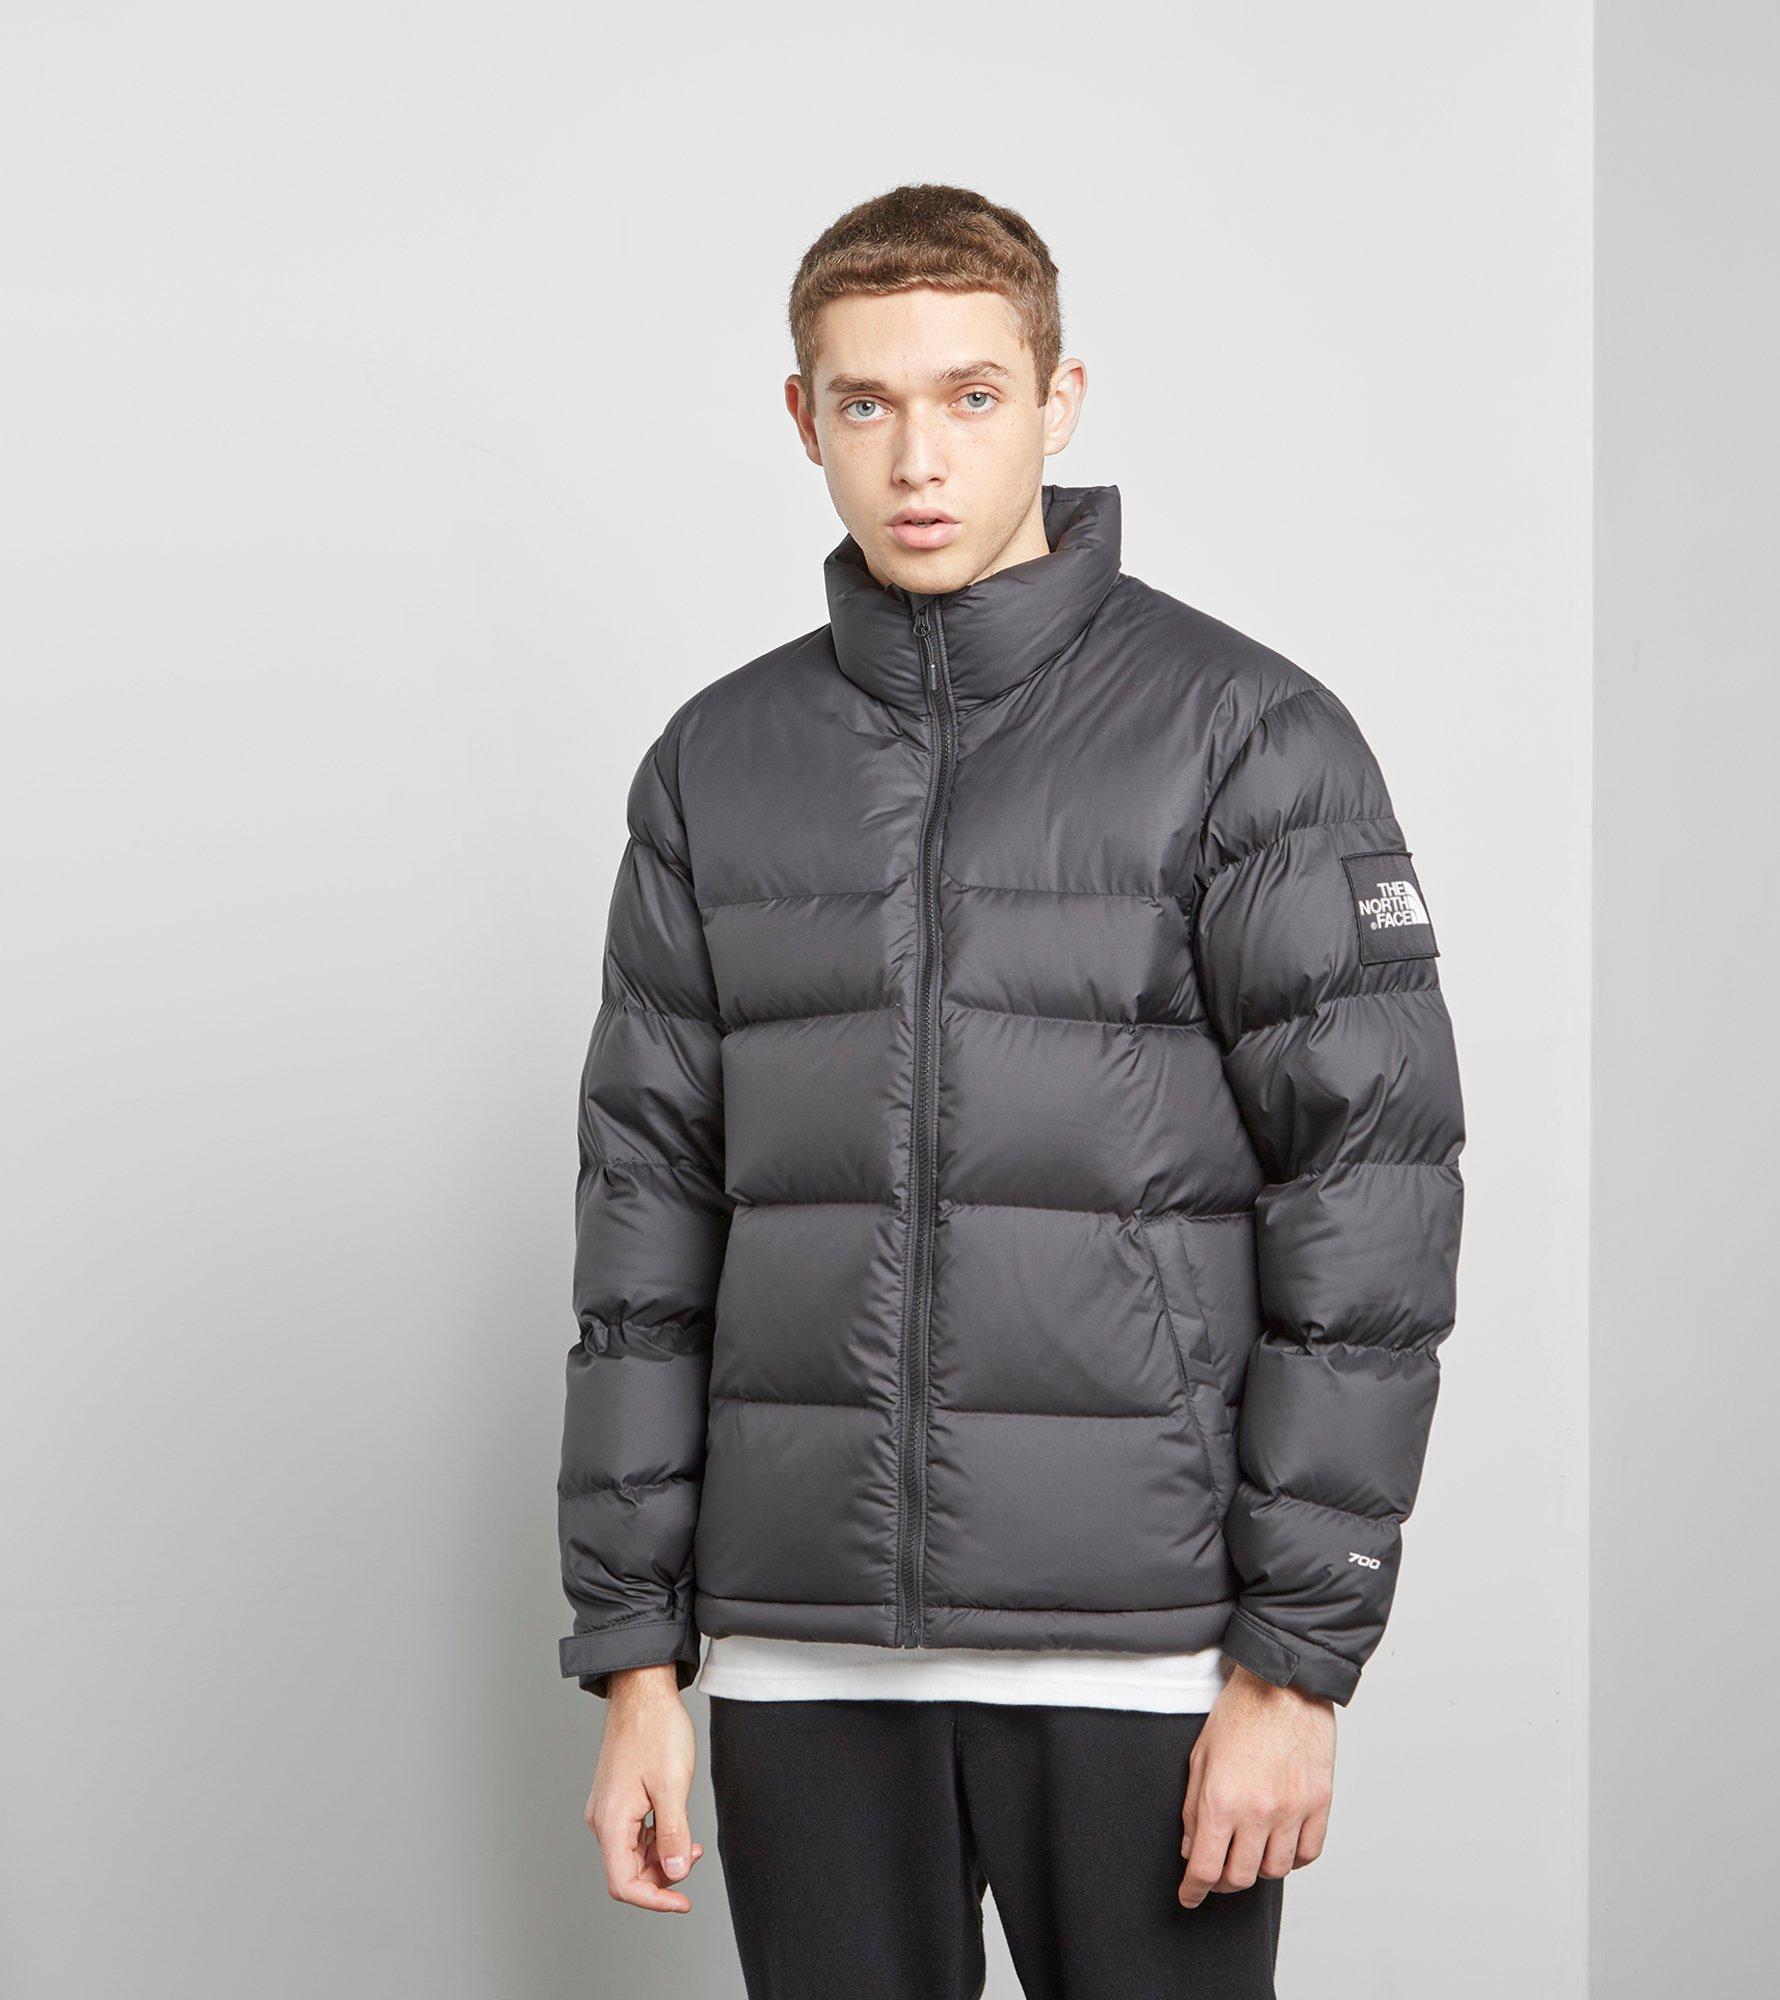 Lyst - The North Face 1992 Nuptse Jacket in Black for Men